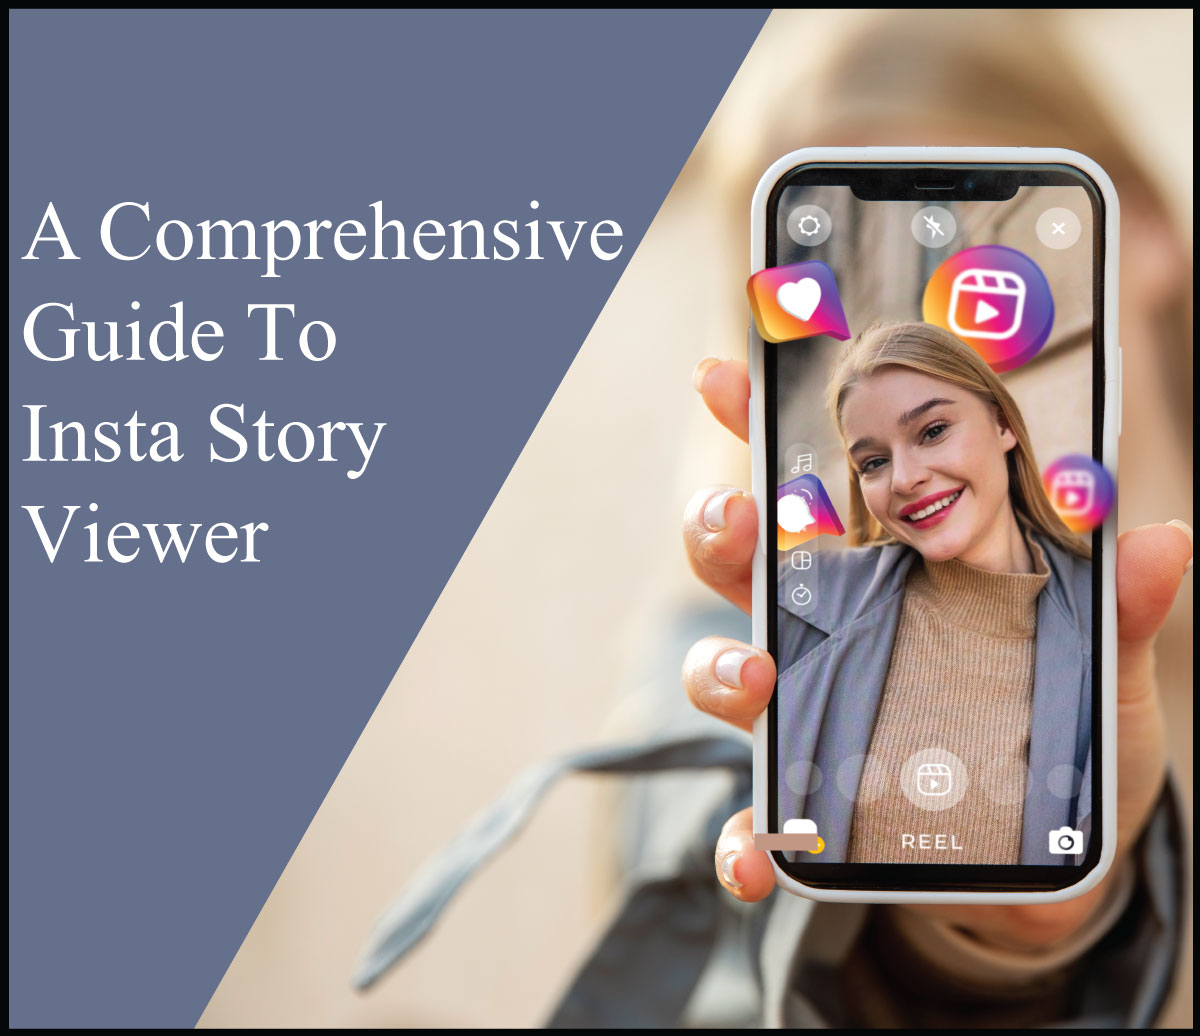 A Comprehensive Guide To Insta Story Viewer